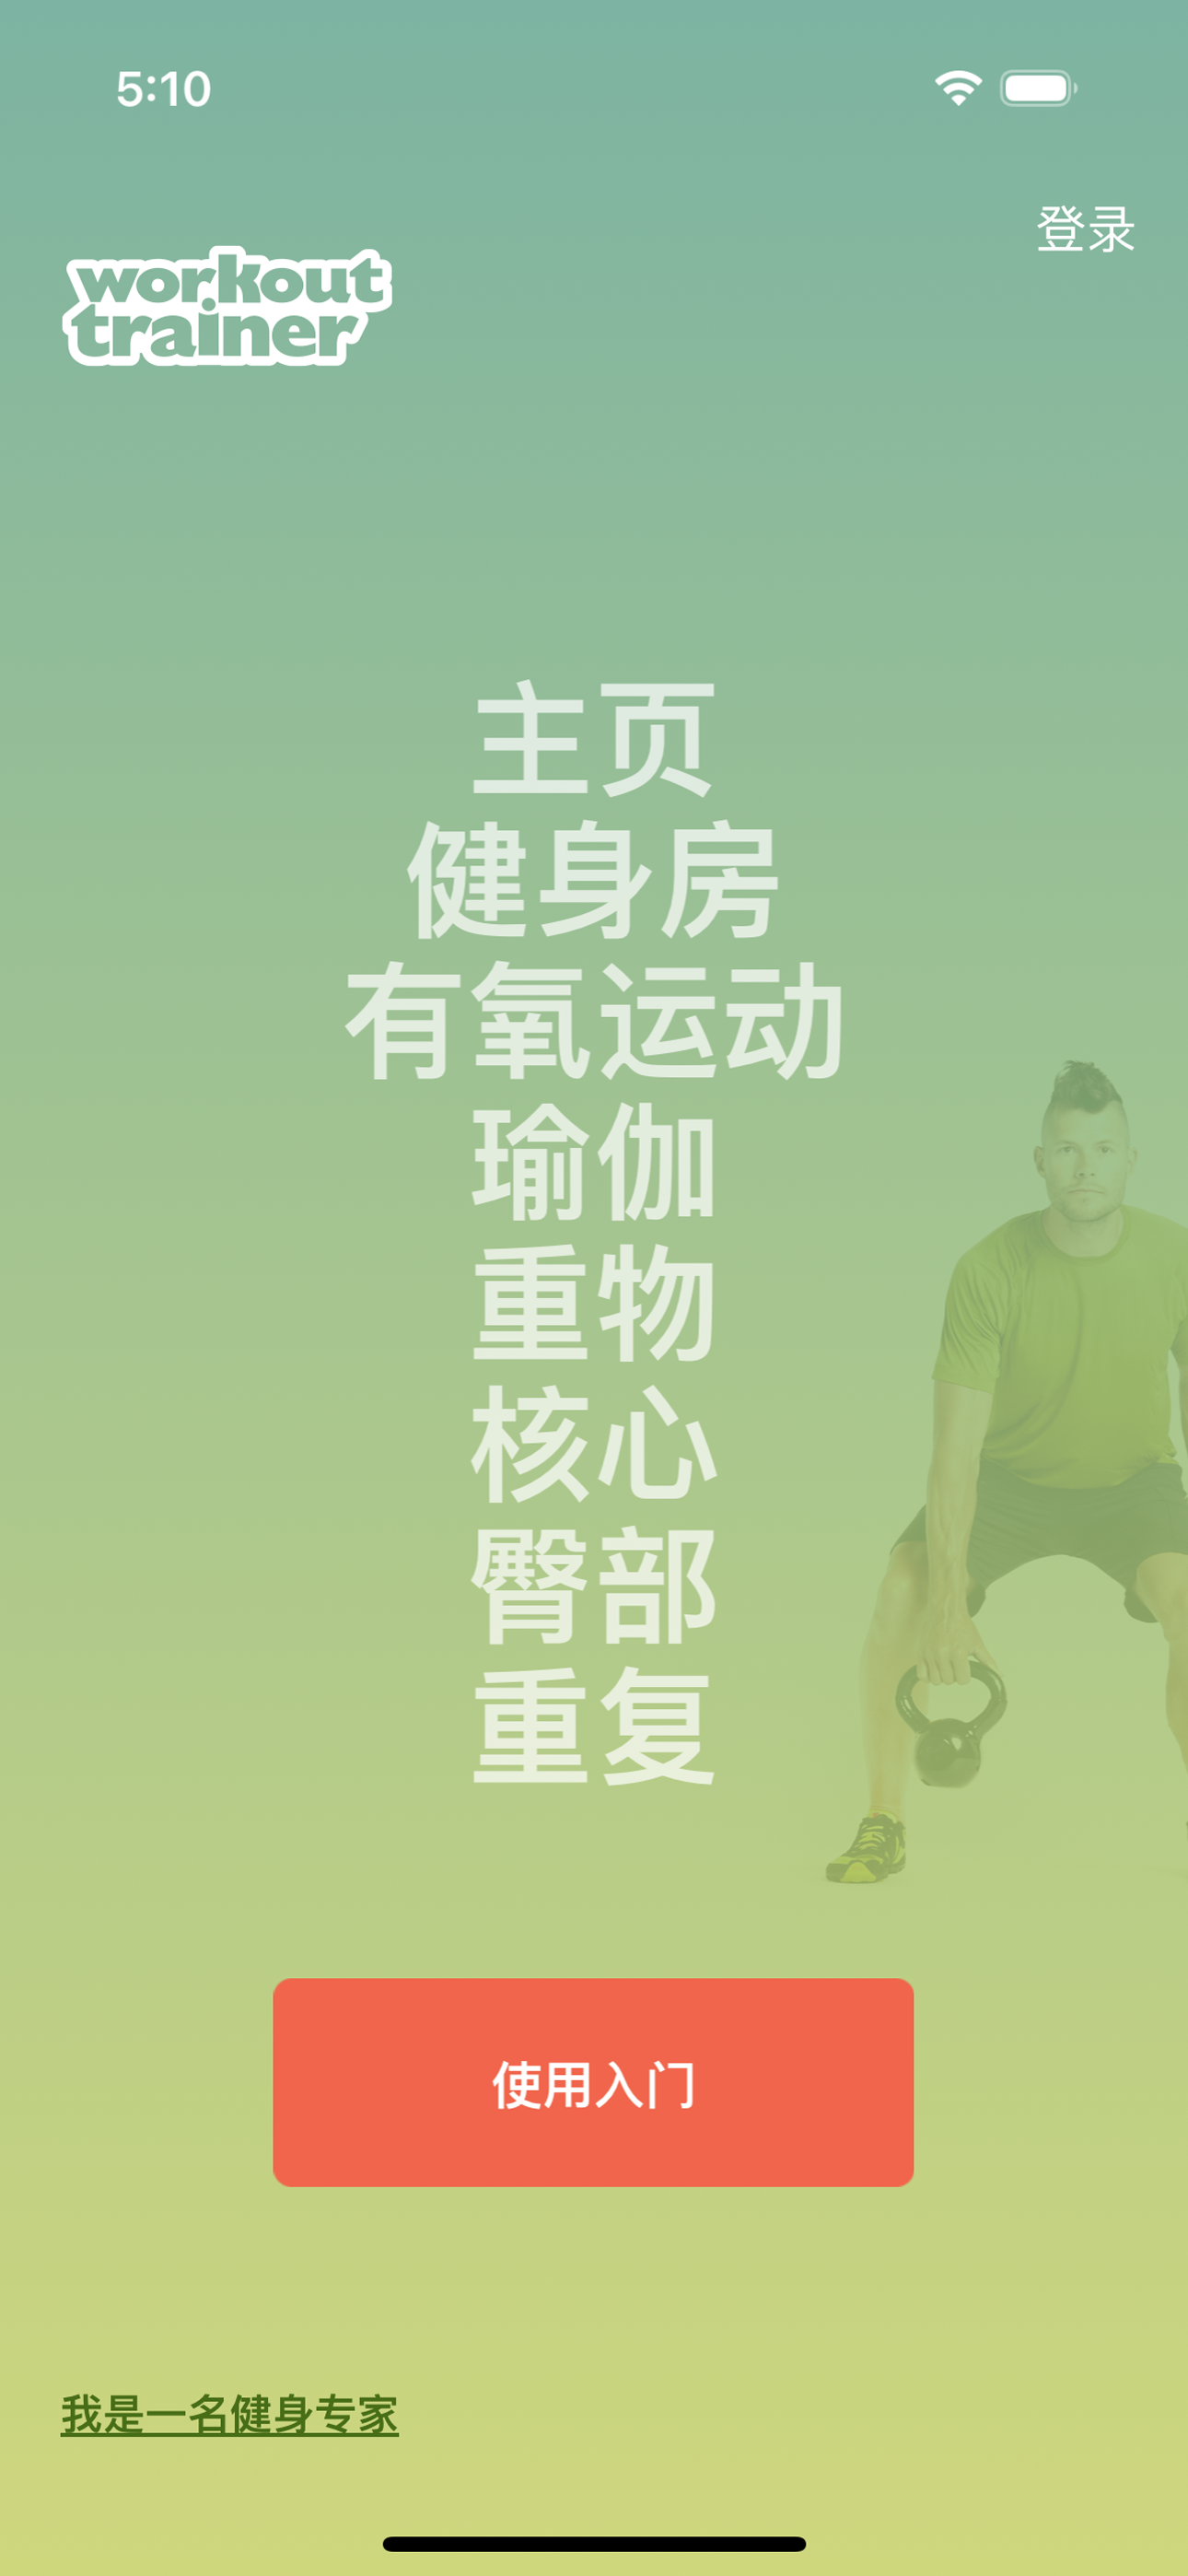 zh cn chinese skimble workout trainer ios phone launch instructions 2023